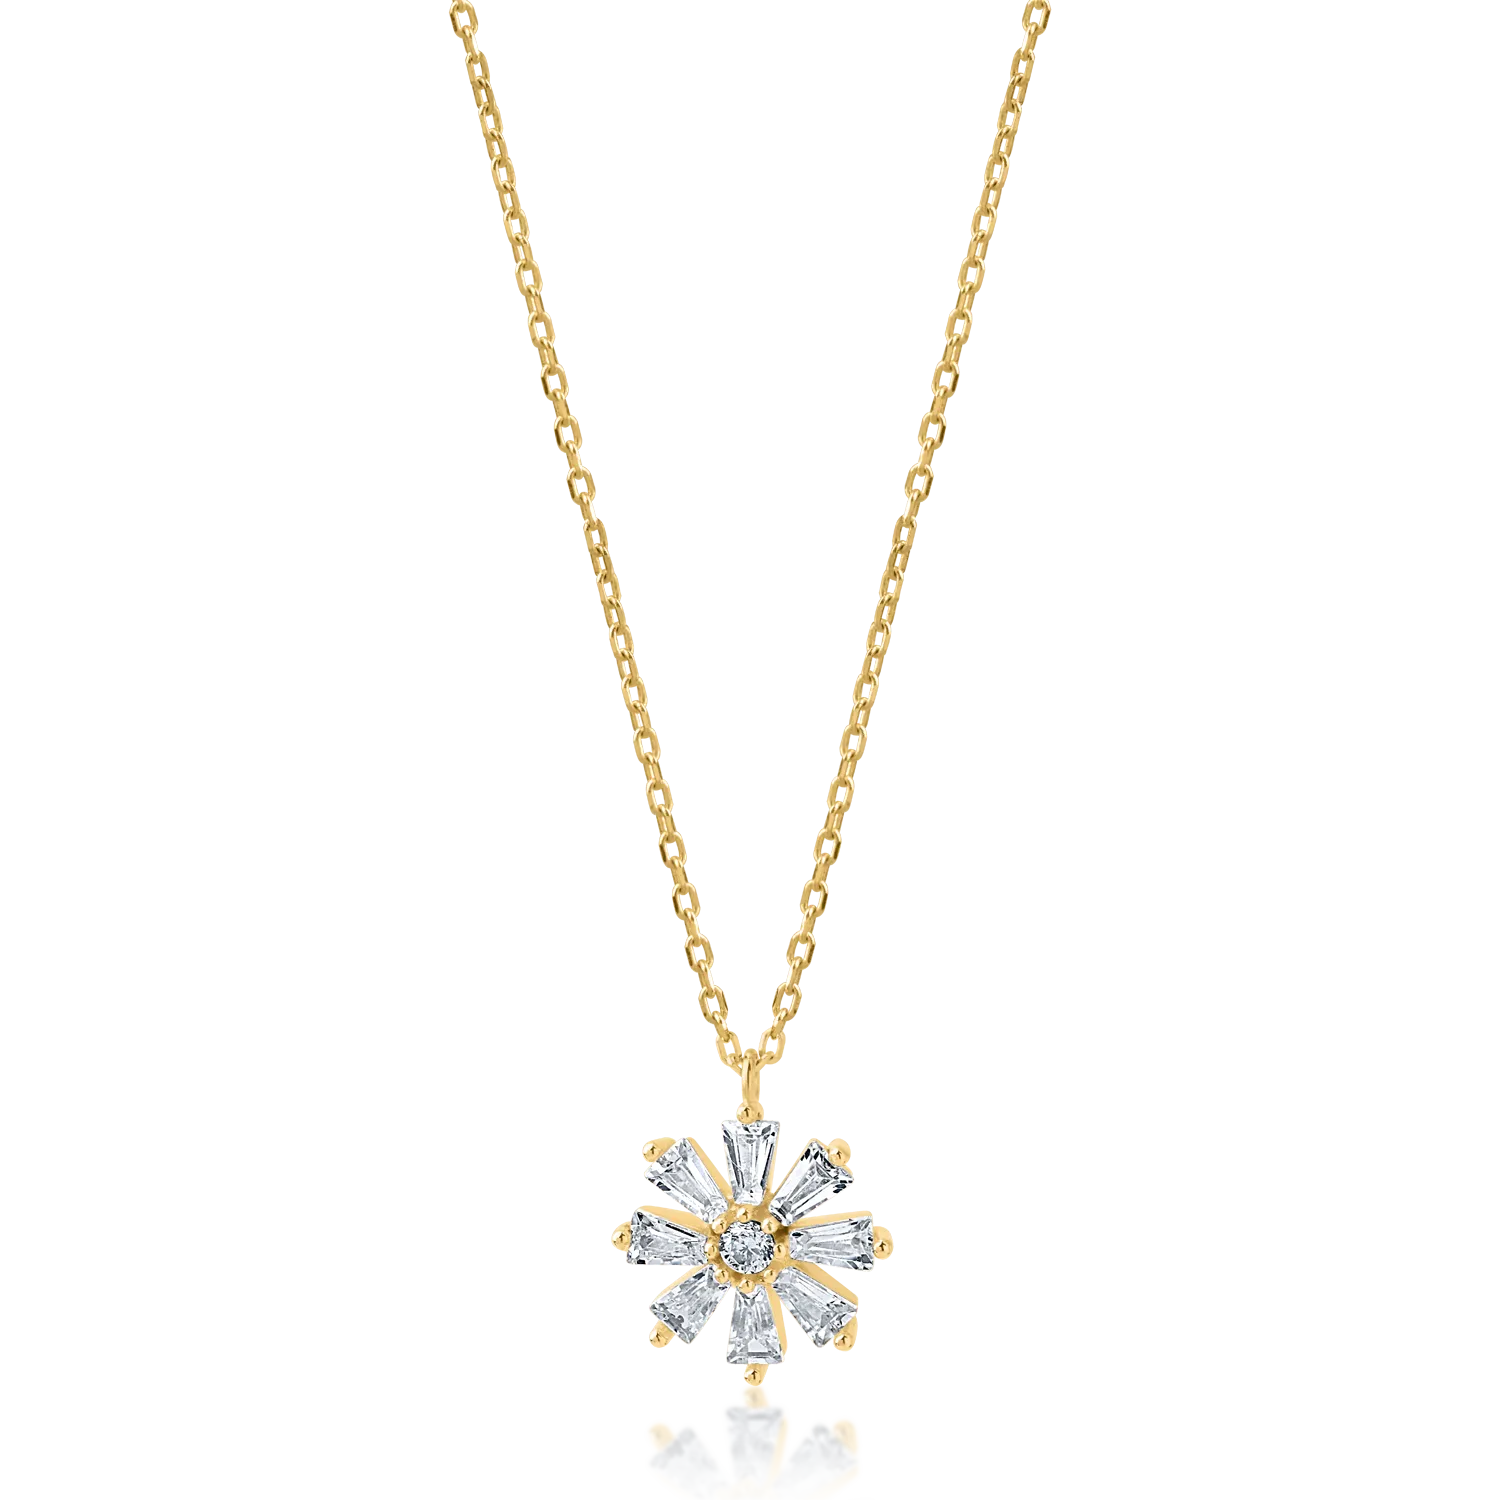 Yellow gold flower pendant necklace